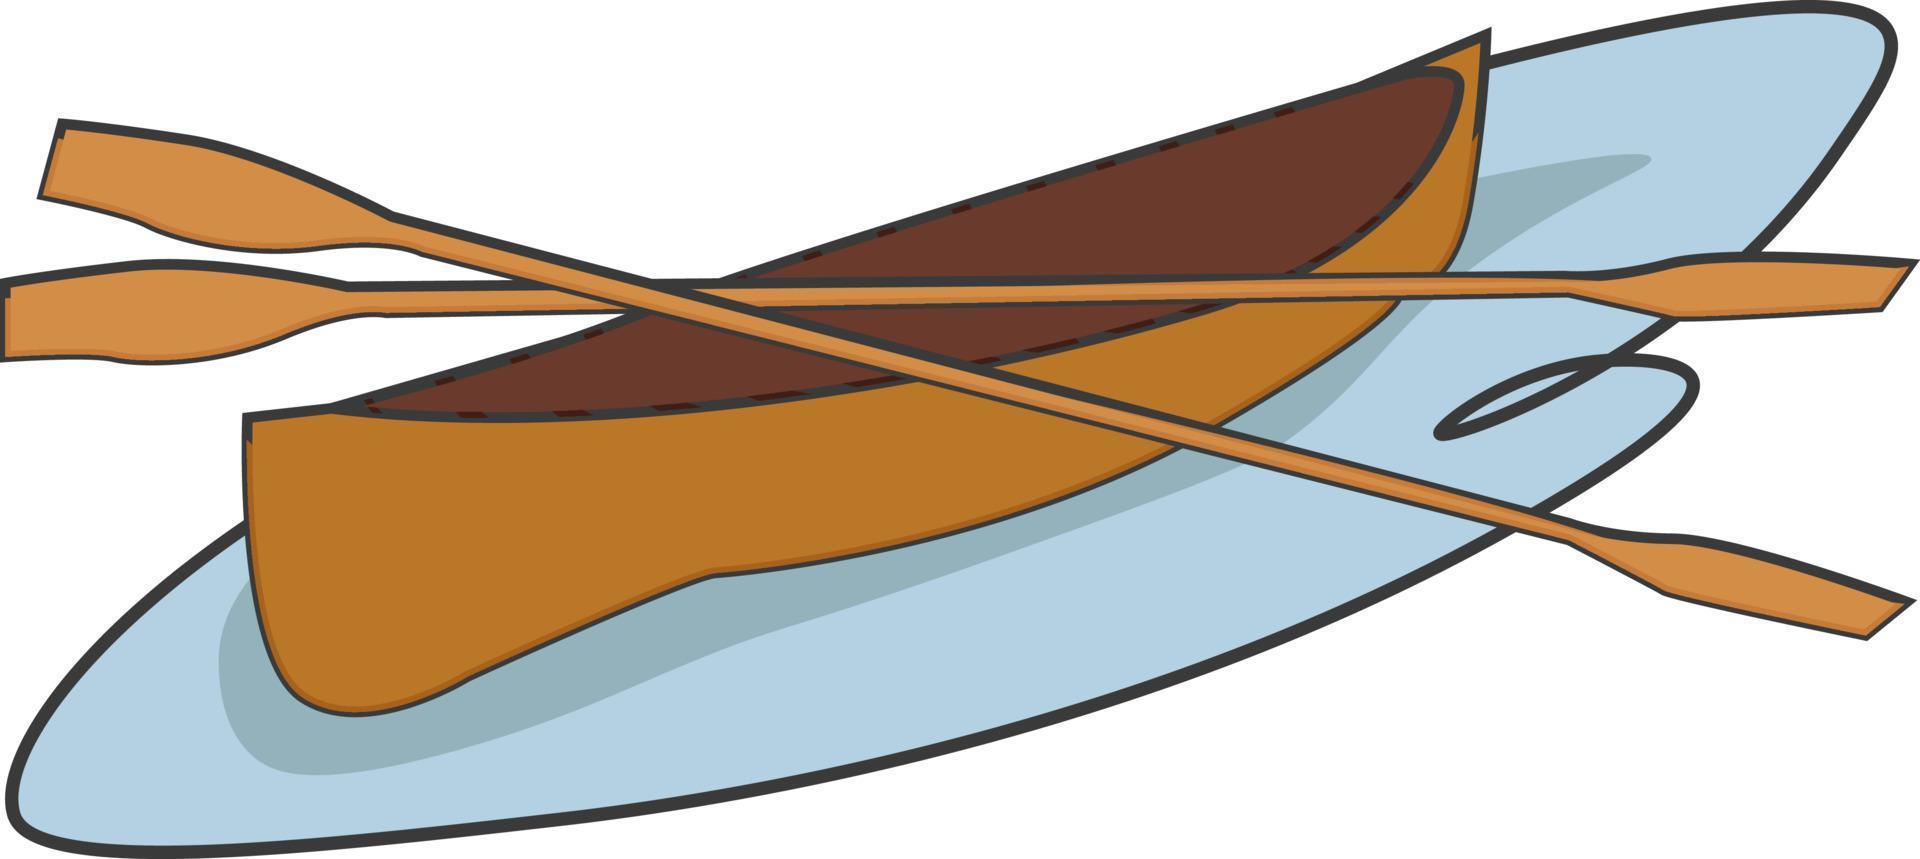 Canoe in the water ,illustration, vector on white background.